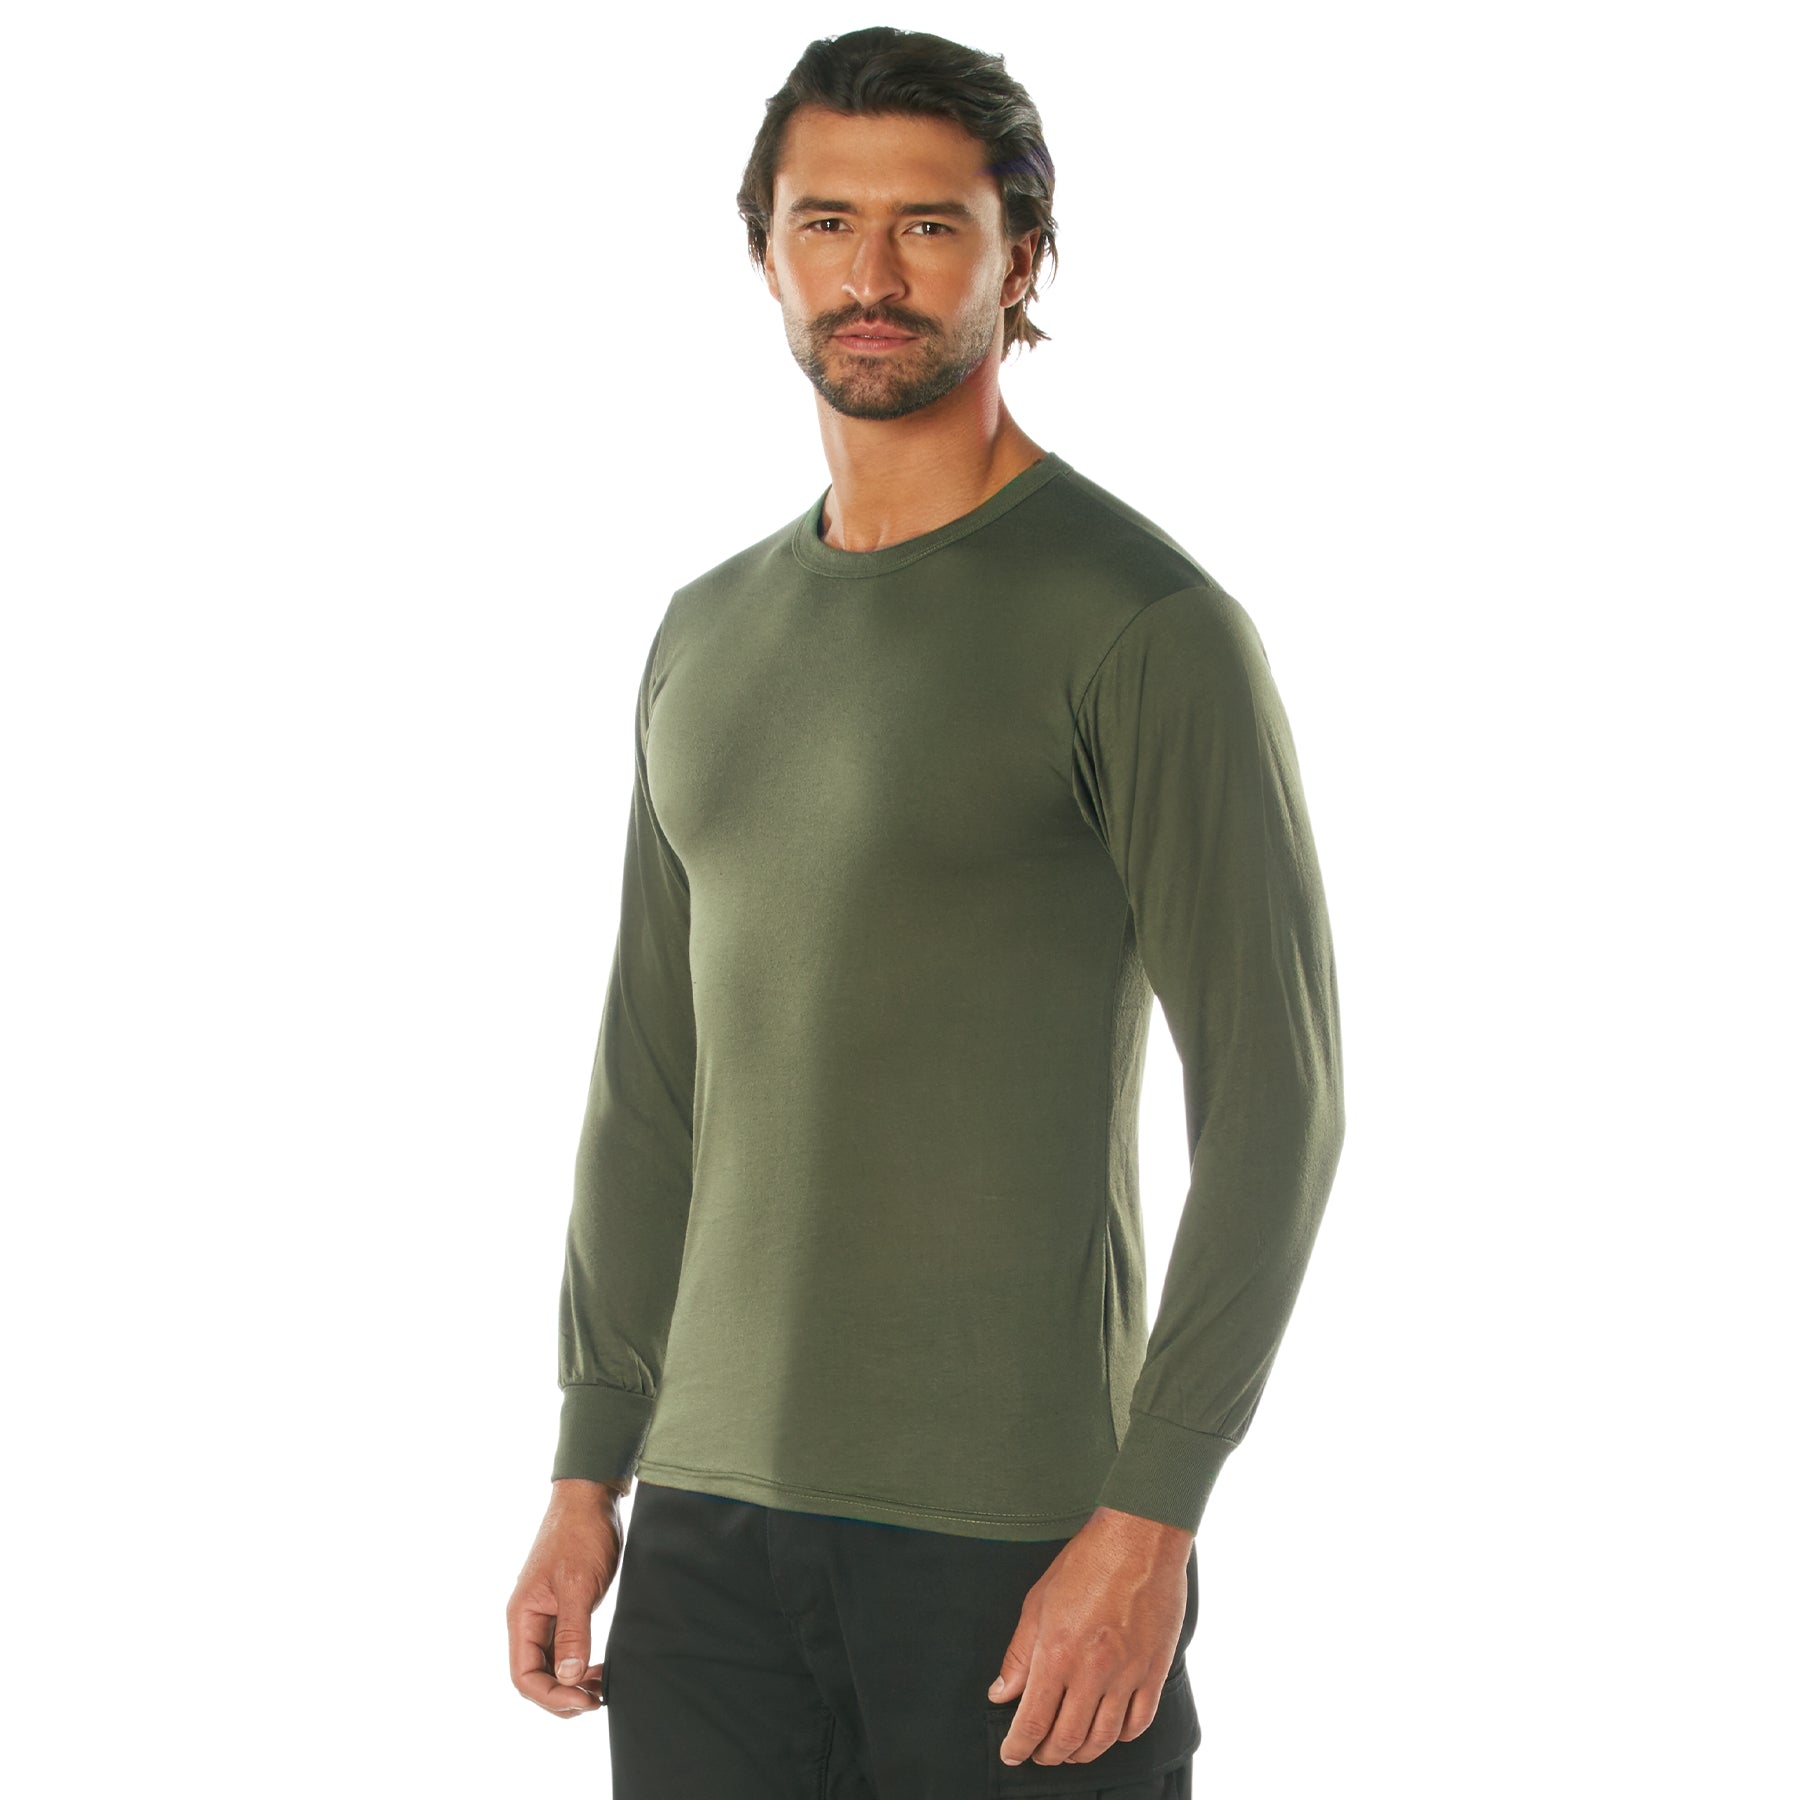 [AR 670-1] Poly Moisture Wicking Long Sleeve Shirts Olive Drab